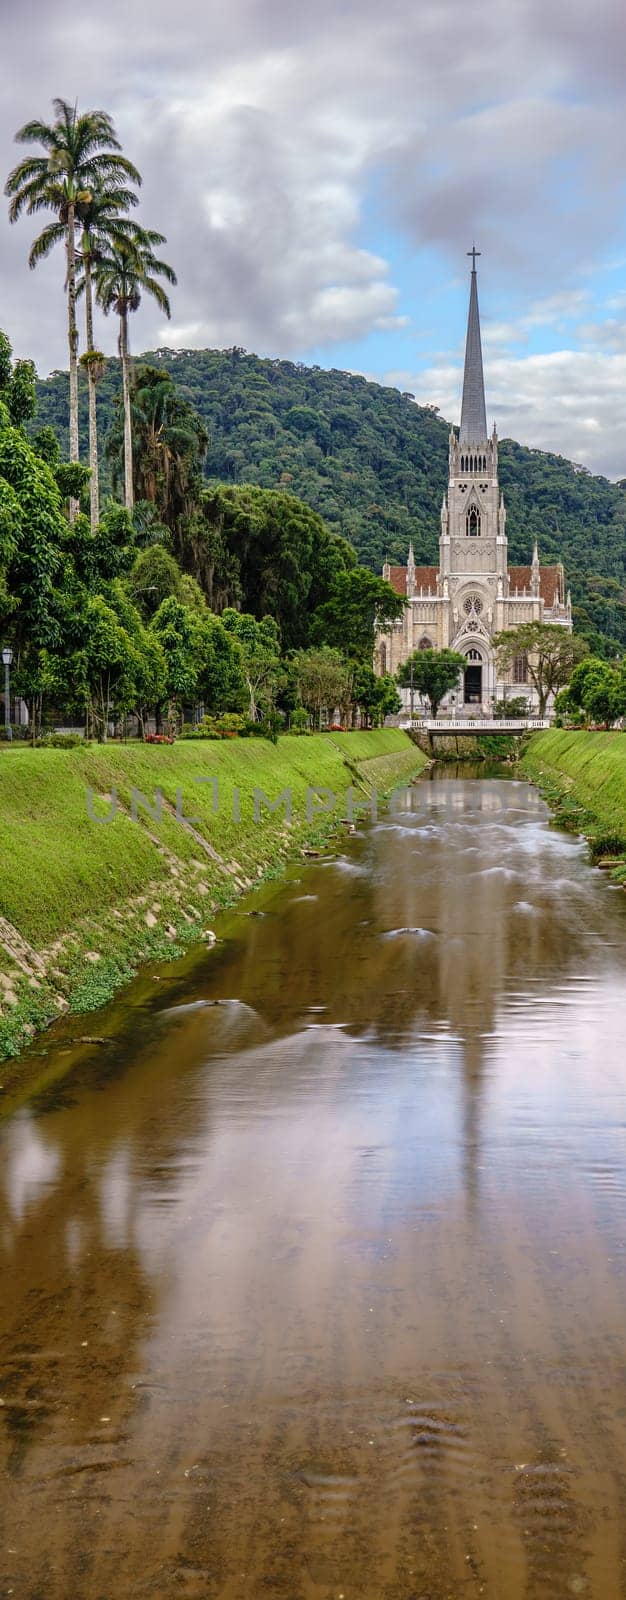 Canal and Cathedral of Petropolis: Water in Motion and Historic Architecture by FerradalFCG